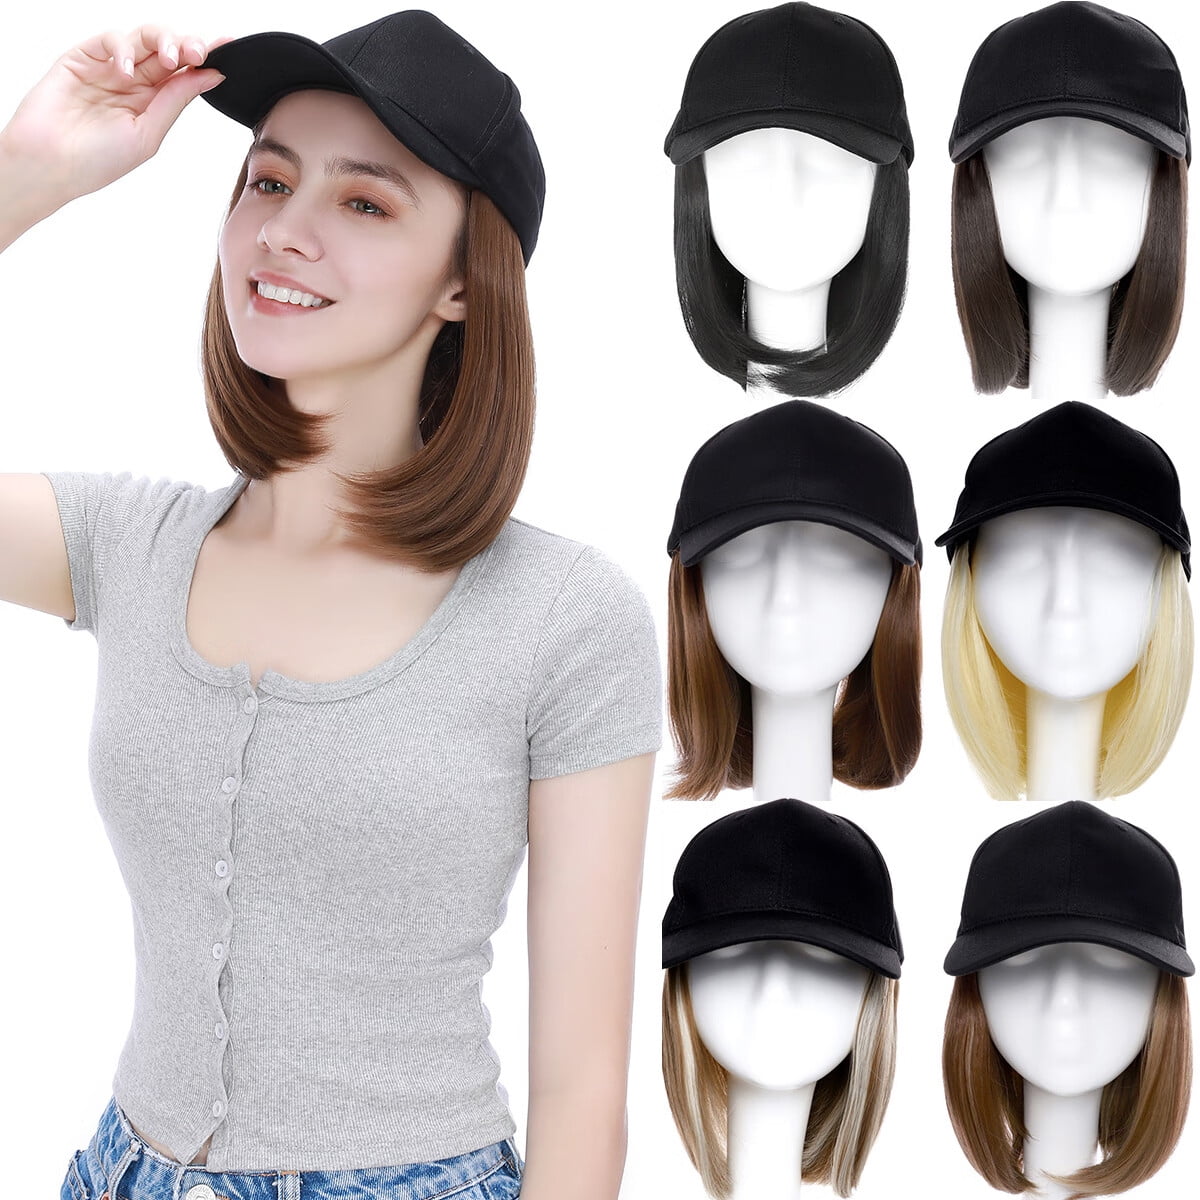 Dopi Baseball Cap Wigs for Women Black Hat With Bob Hair Extensions ...